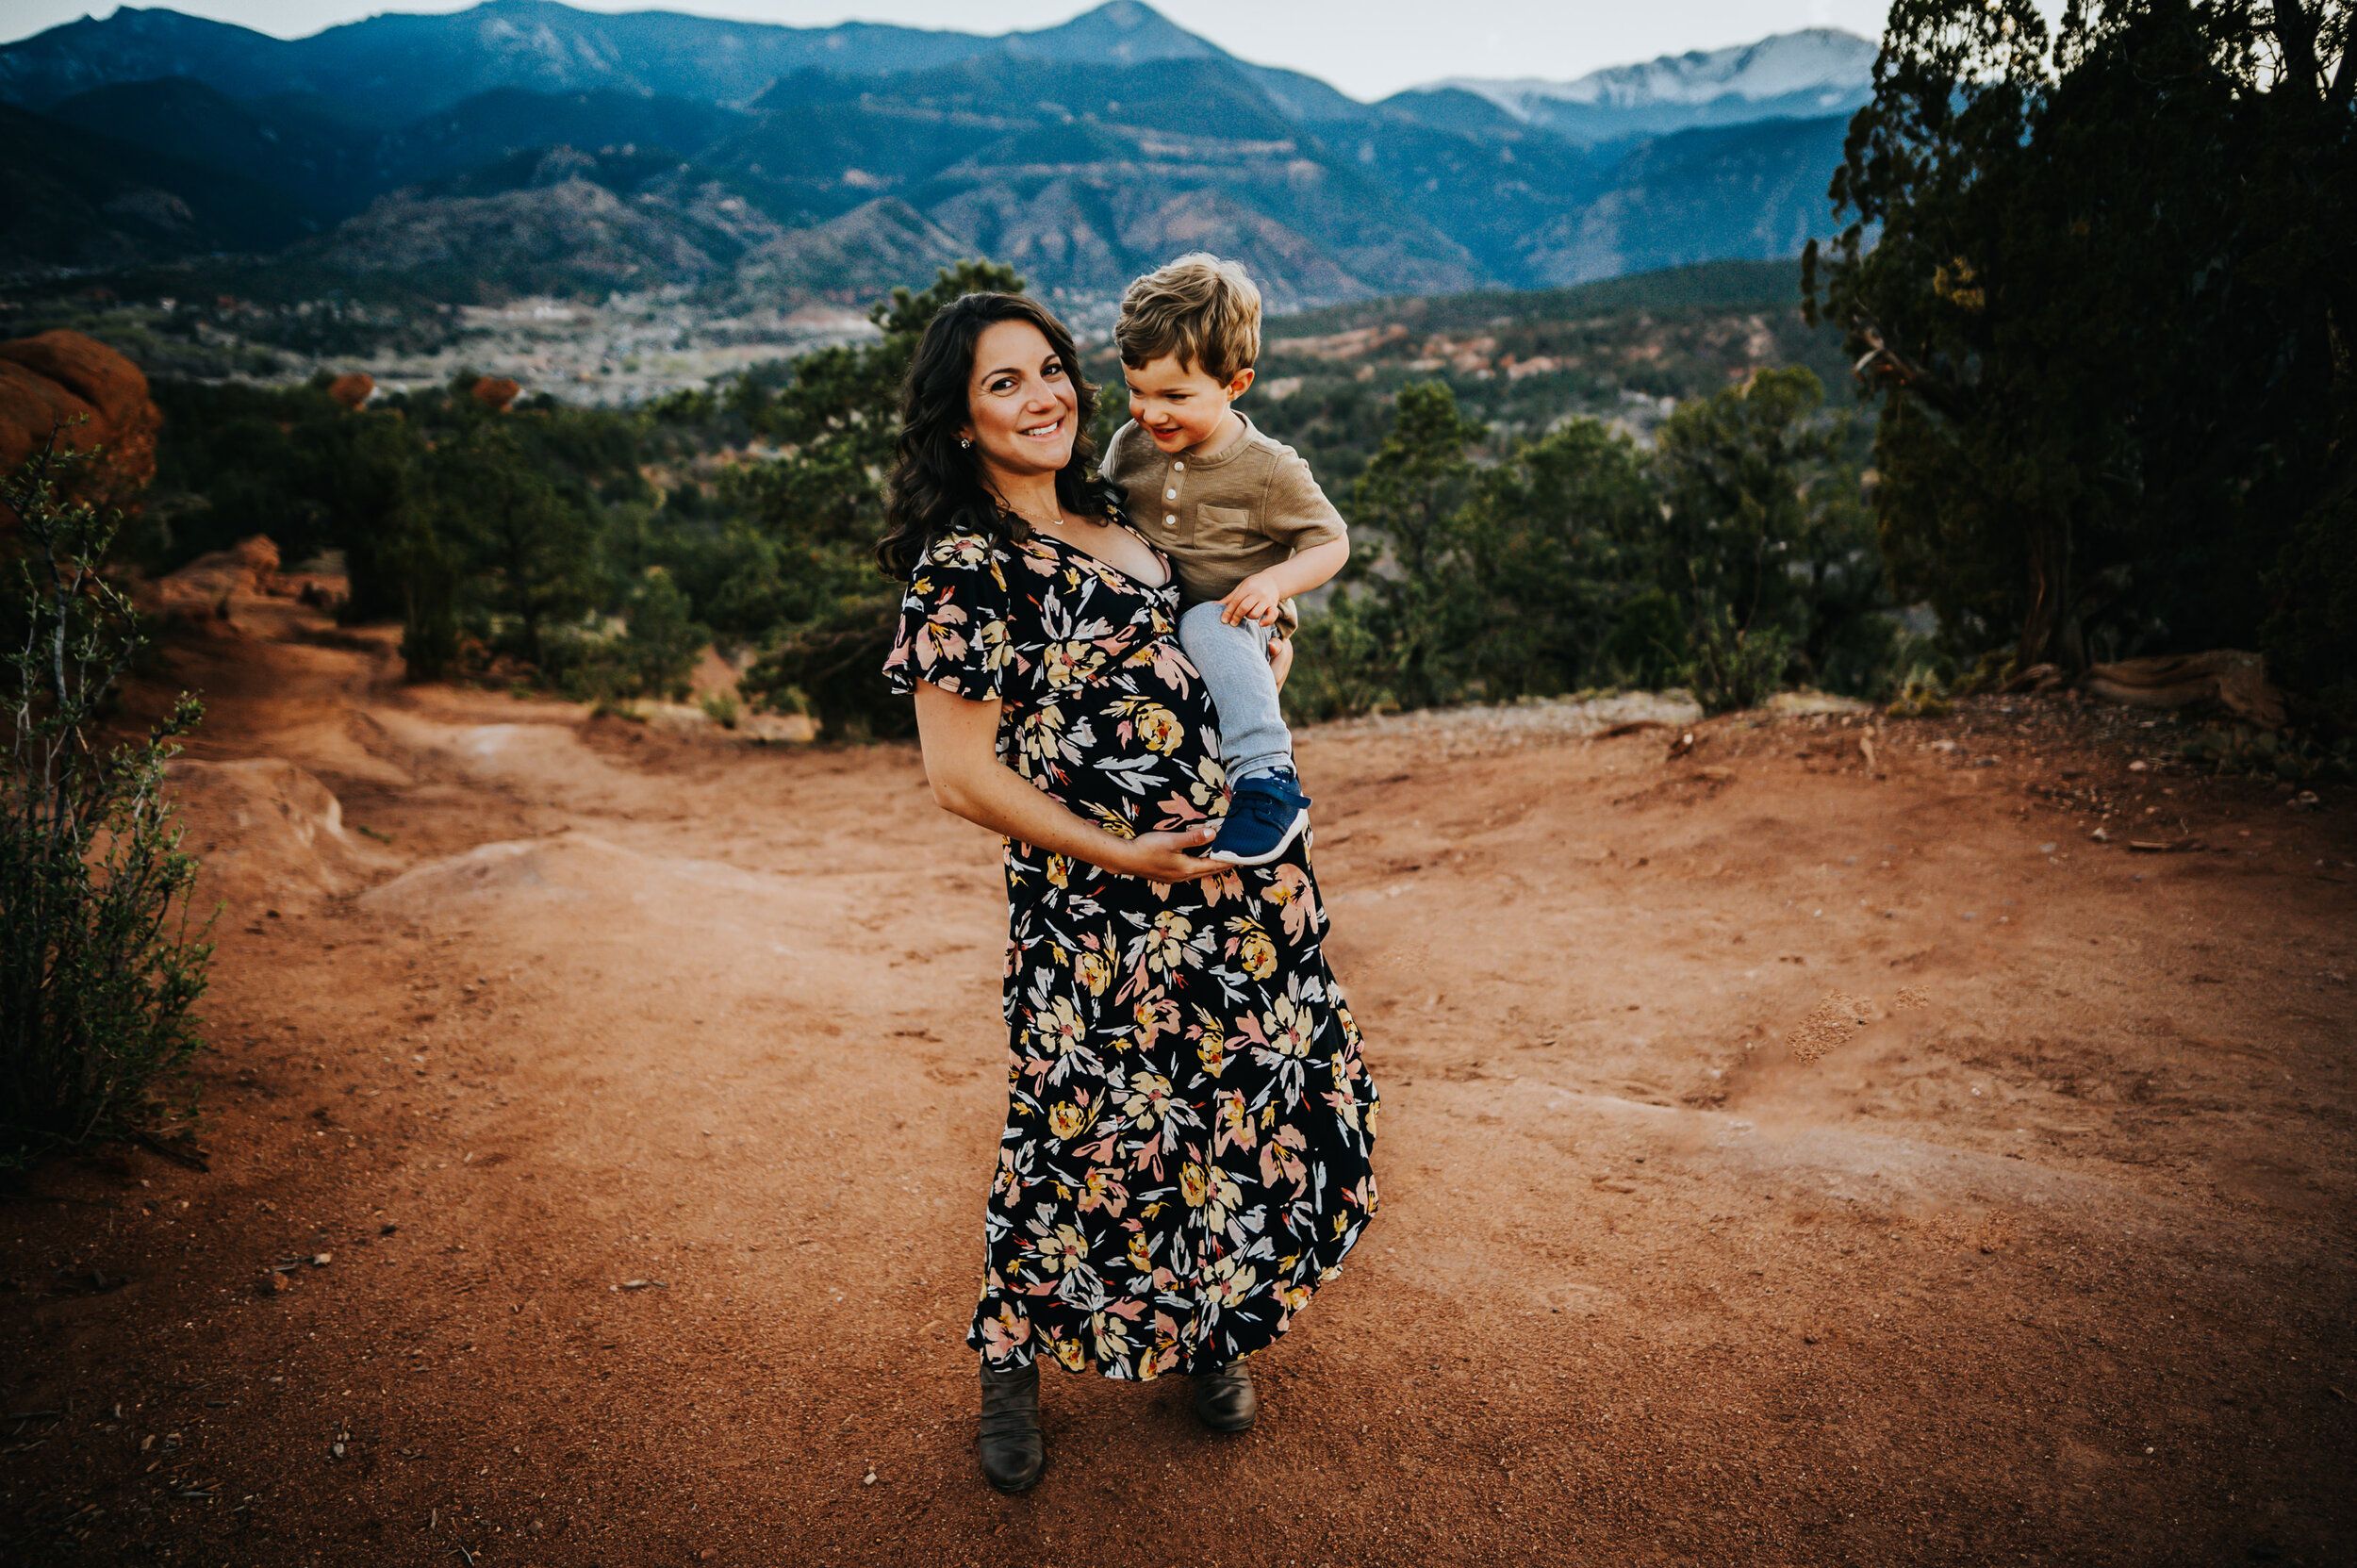 Andrea Grimm Maternity Family Session Colorado Springs Sunset Garden of the Gods Wild Prairie Photography-24-2020.jpg